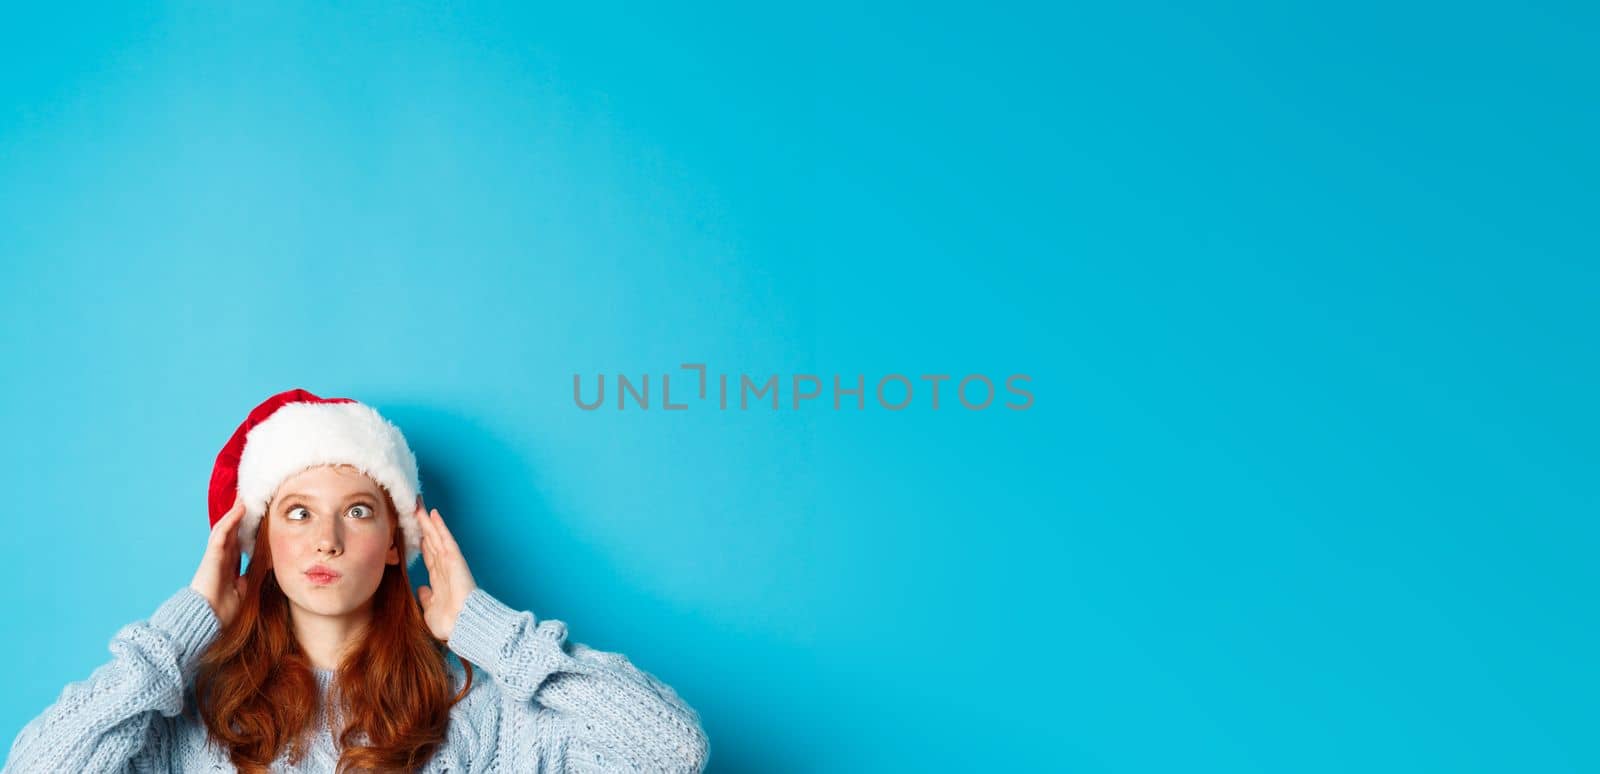 Winter holidays and Christmas eve concept. Head of funny redhead girl in santa hat, appear from bottom and squinting, making silly faces, standing near copy space on blue background.